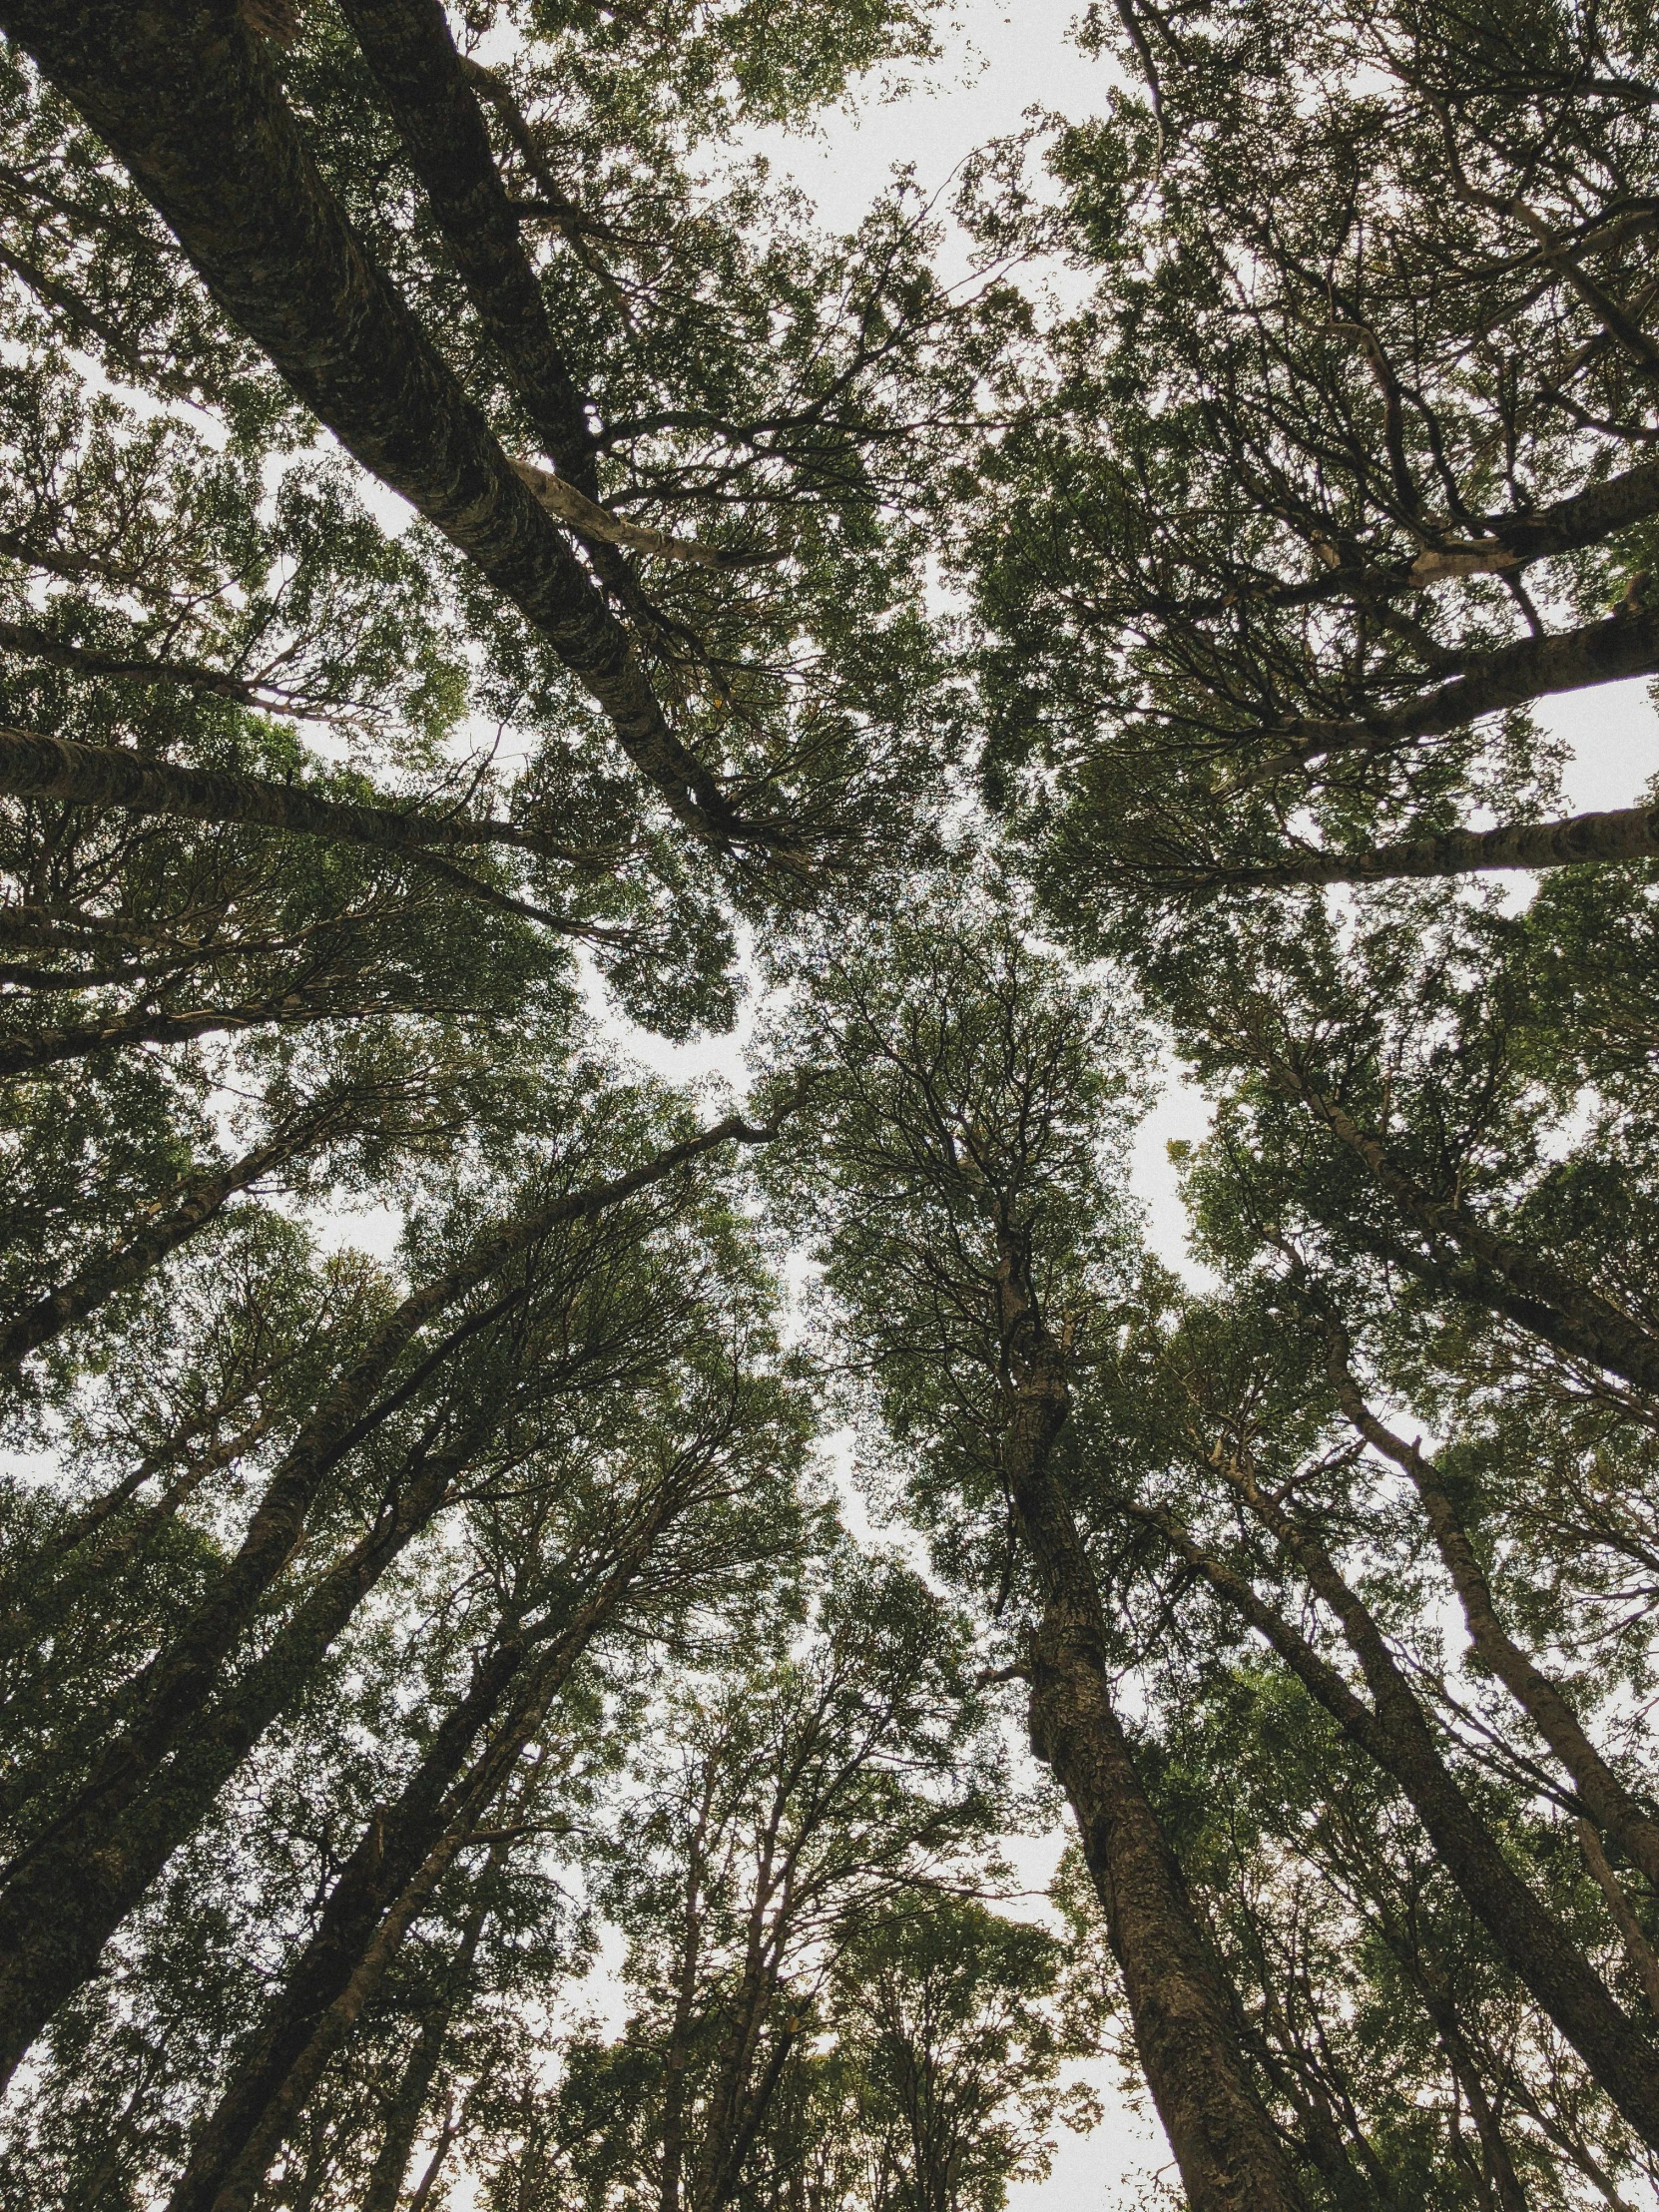 a group of trees looking up from their crowns